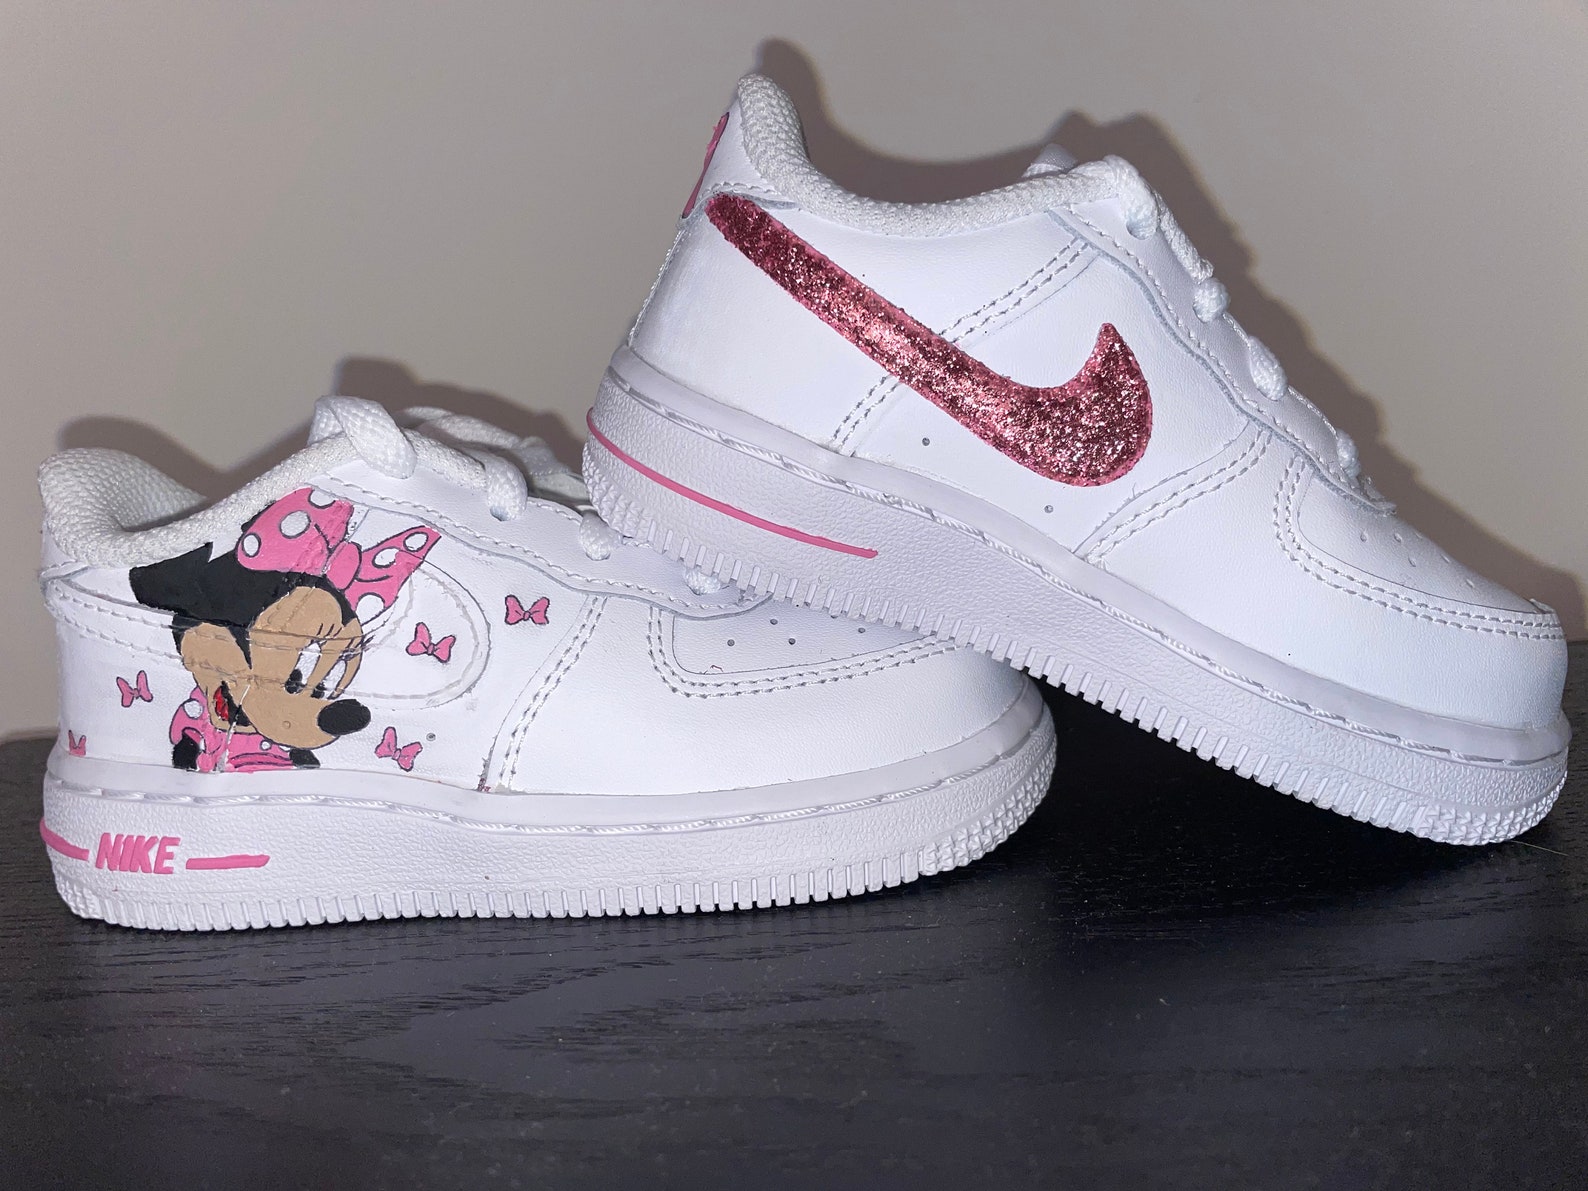 Minnie Mouse Air Force 1s Hand-painted Custom Shoes | Etsy